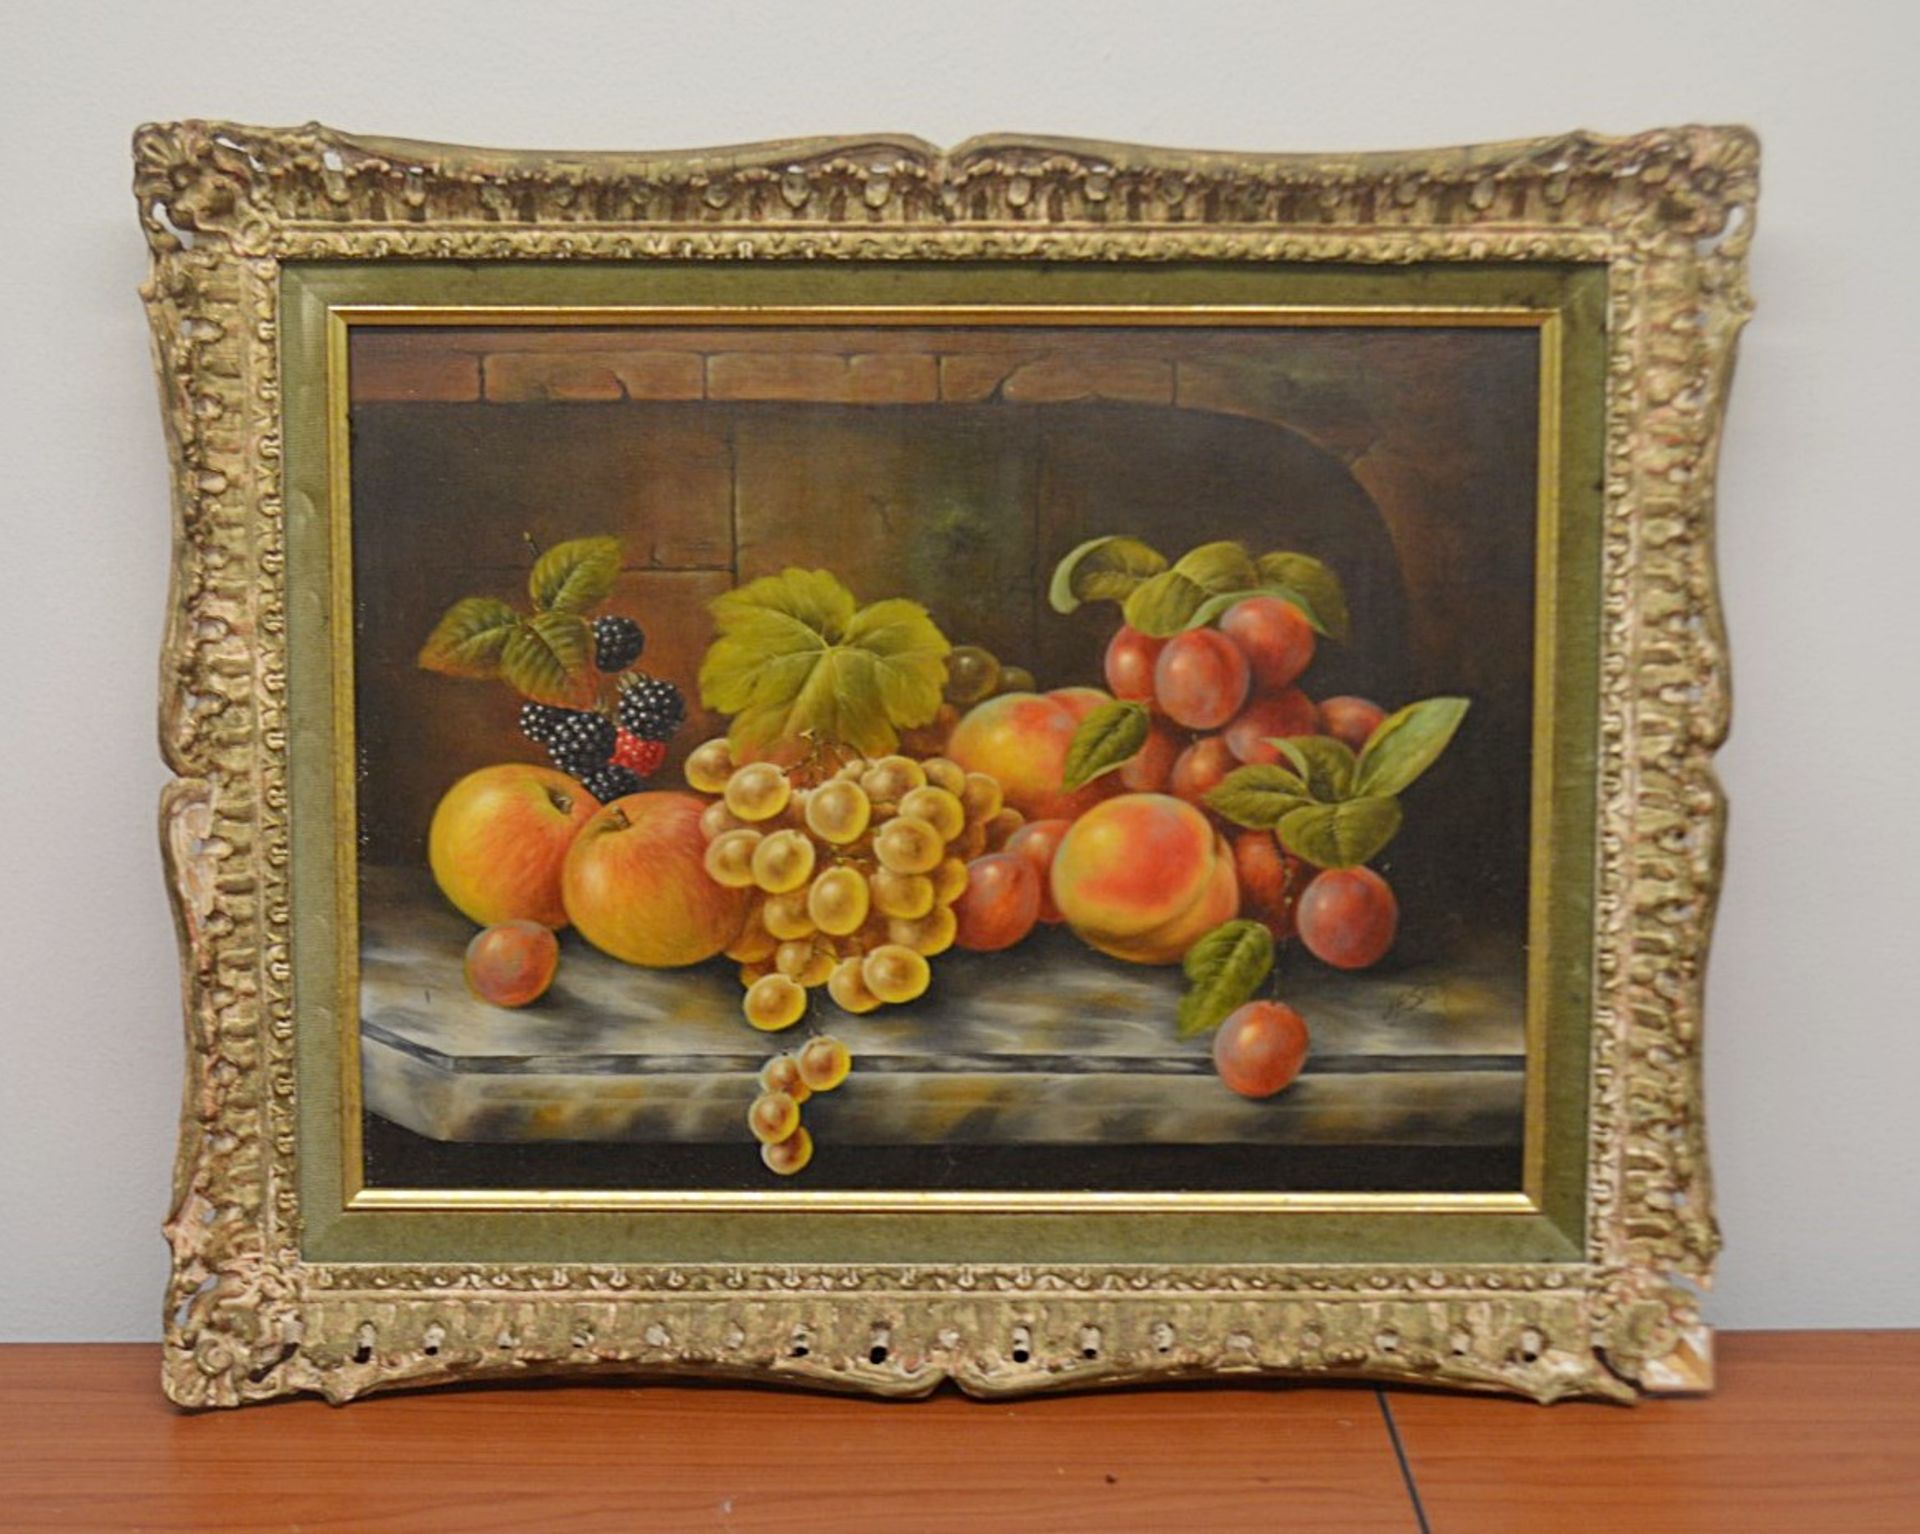 1 x Framed Picture Of Fruit - Dimensions: 52 x 42cm - Ref: MD165 / WH1 D-OFF - Pre-owned, From A